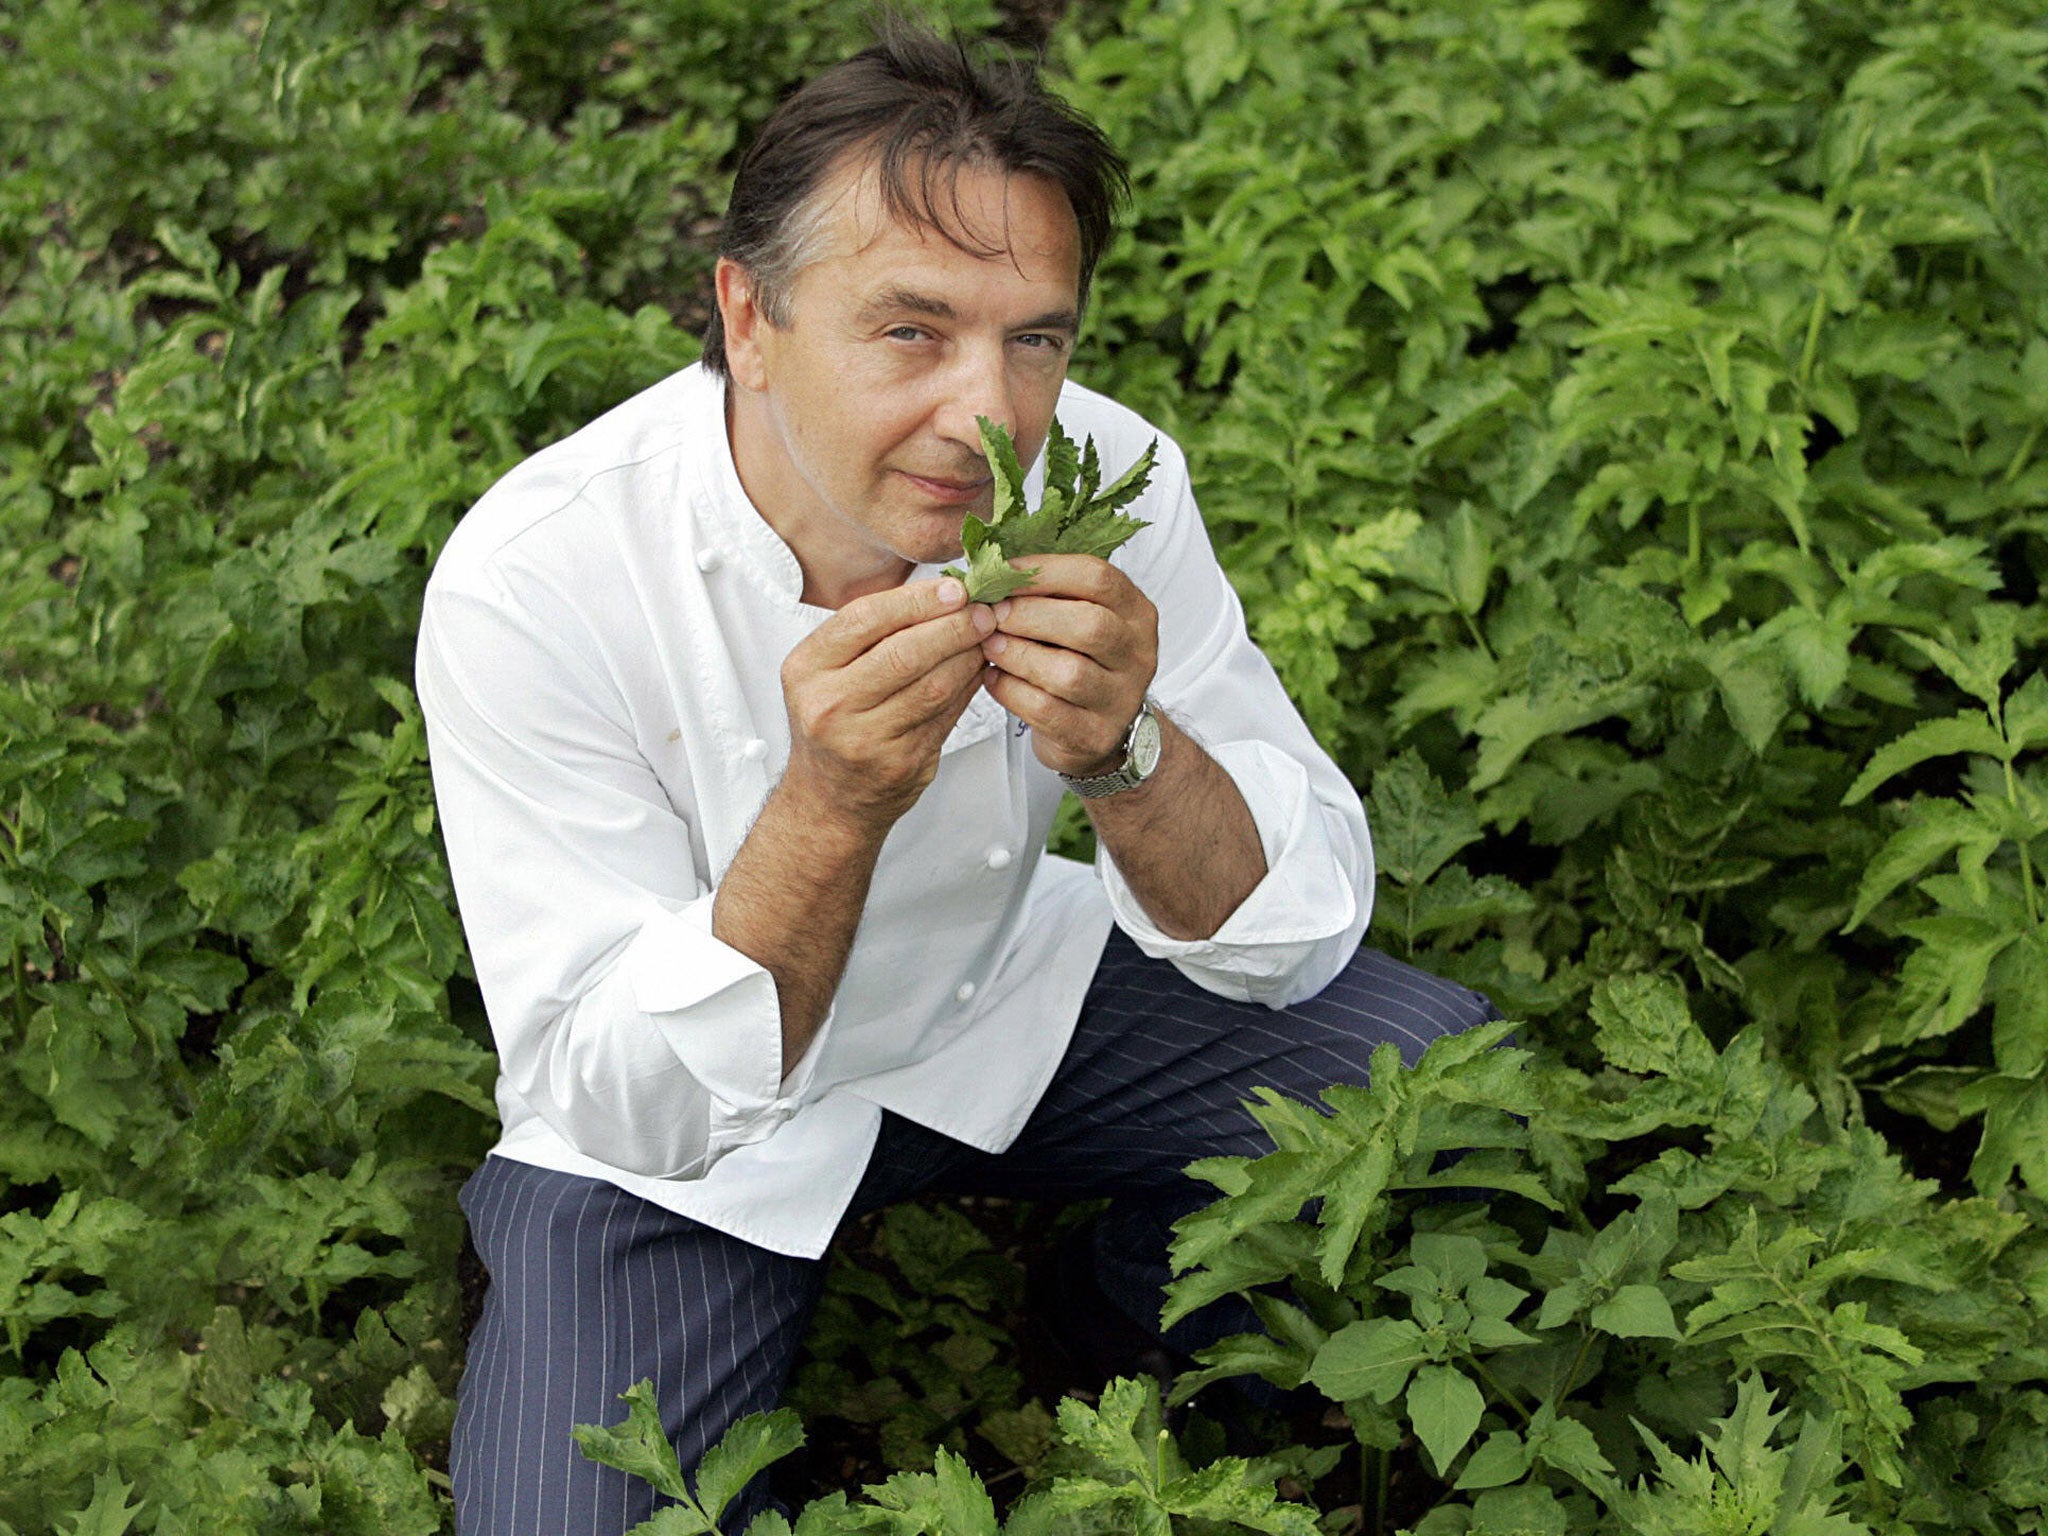 Raymond Blanc has called for gardening lessons to be made compulsory in schools